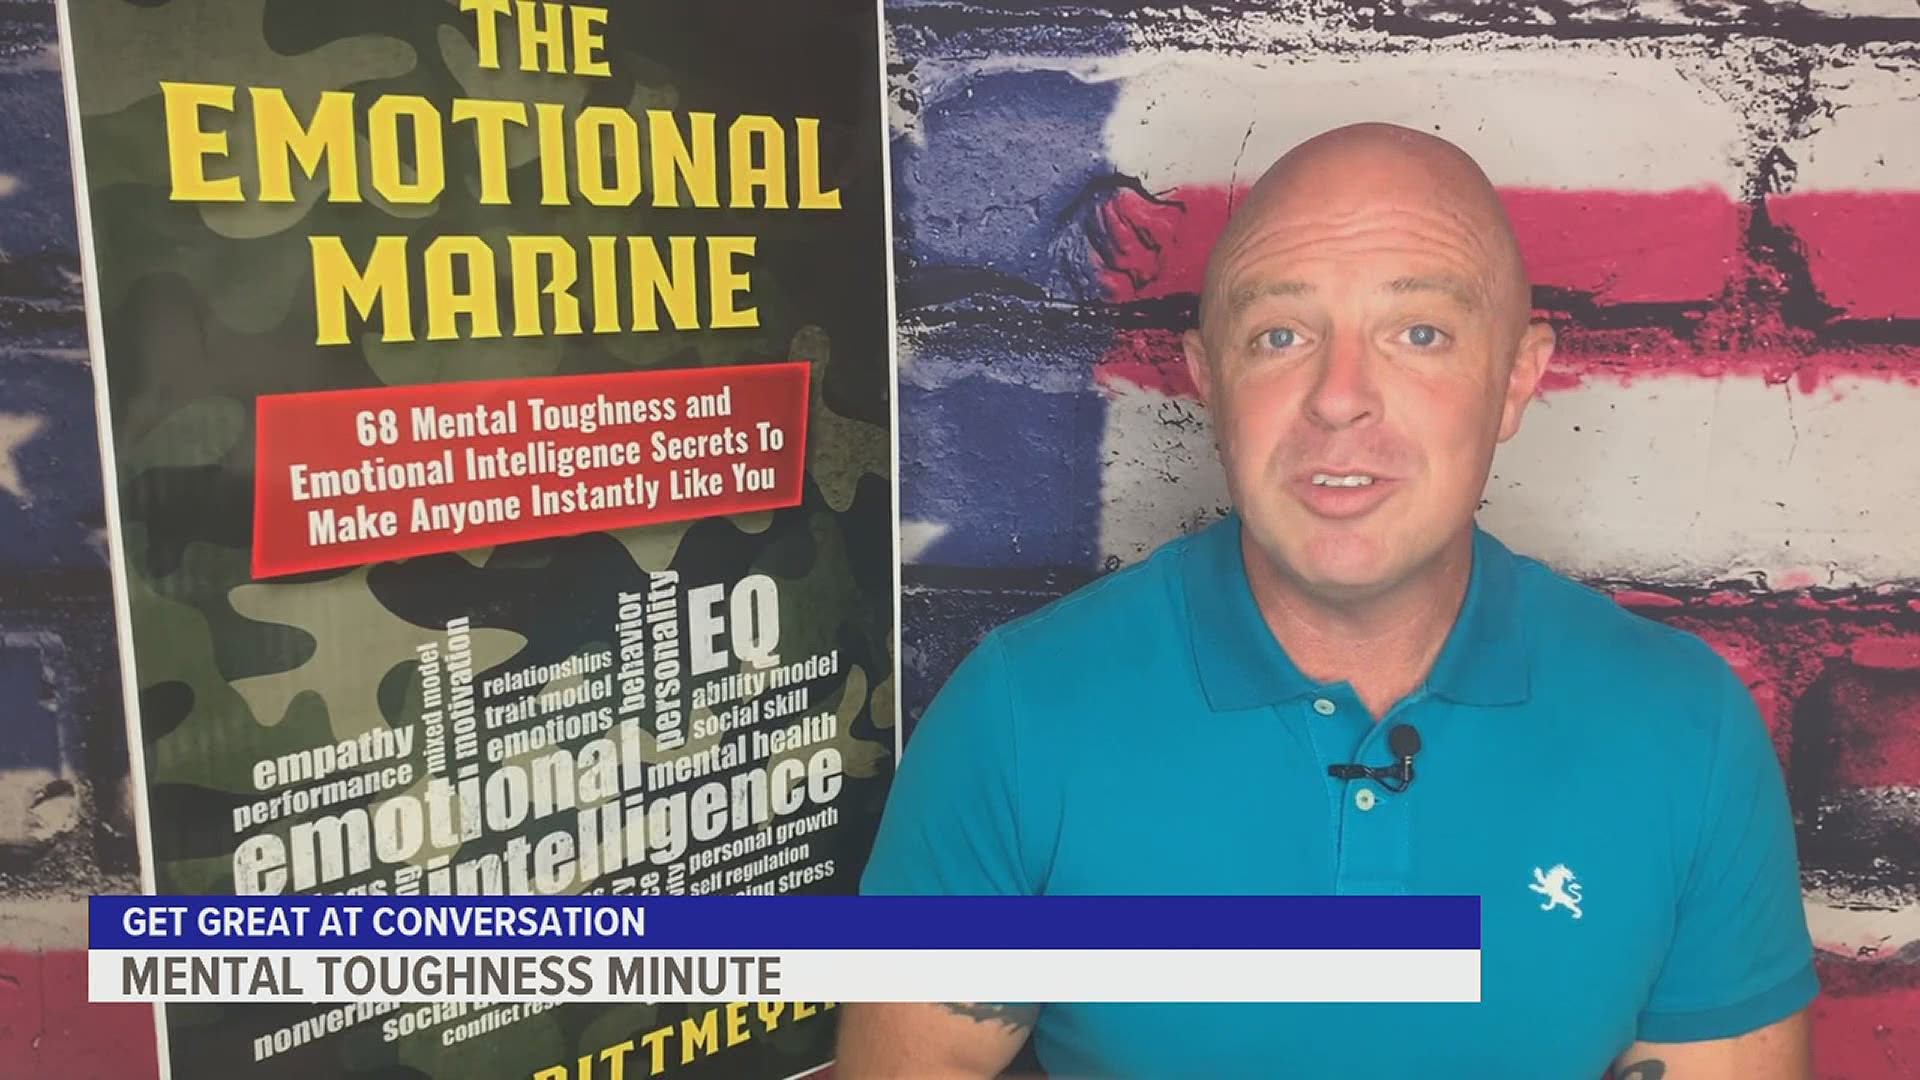 Mental Toughness Minute with Eric Rittmeyer